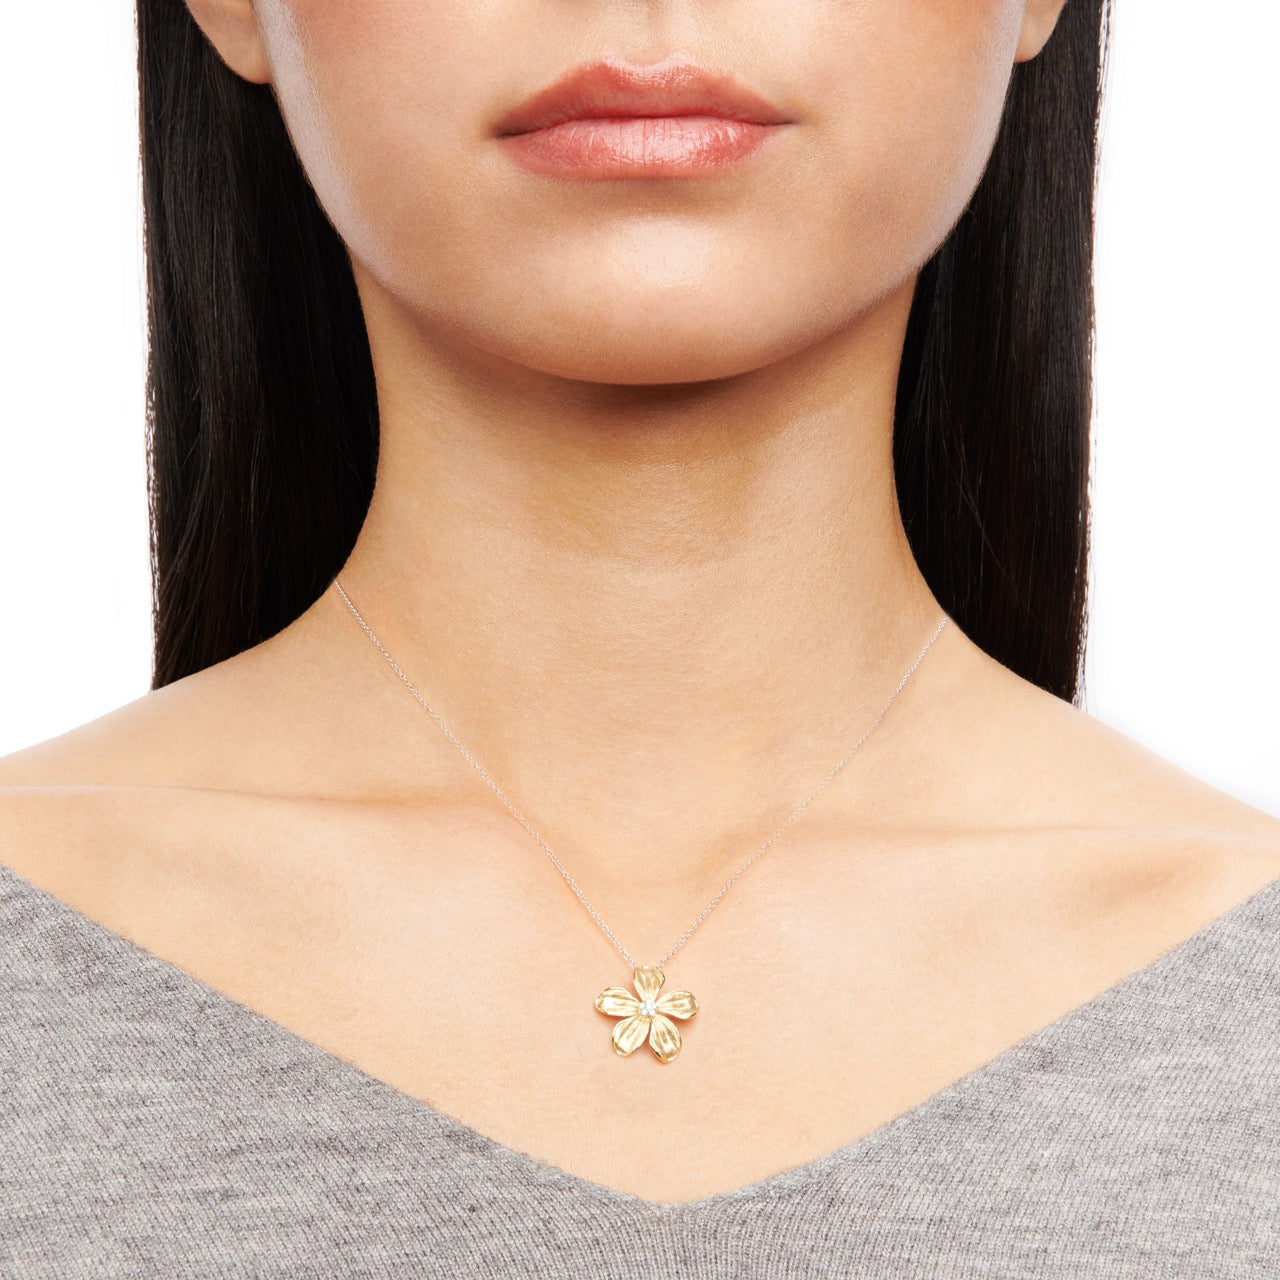 Flower Pendant Necklace in 18k Gold with Diamonds LP4845